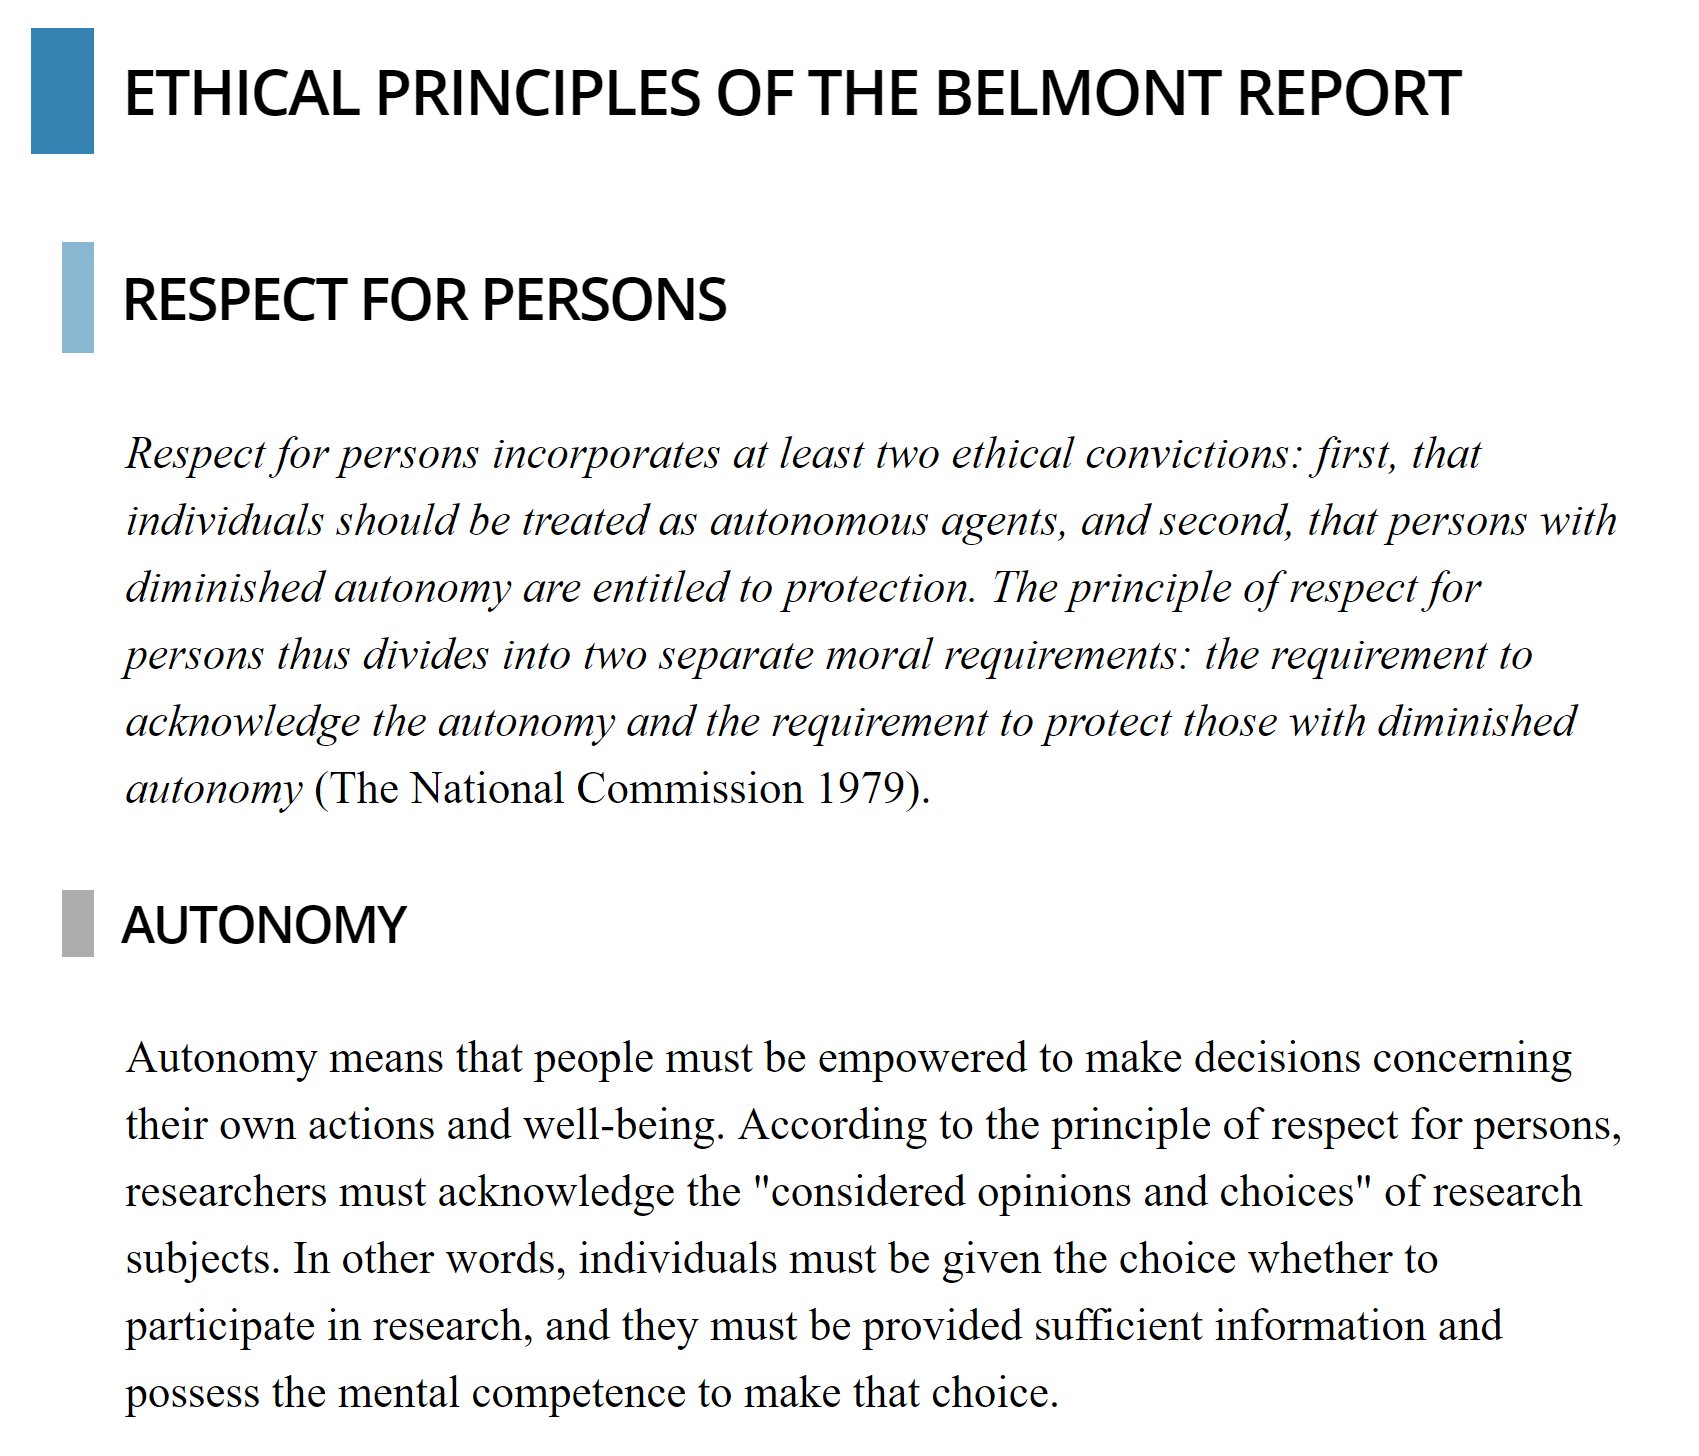 Autonomy and the principle of respect for autonomy.